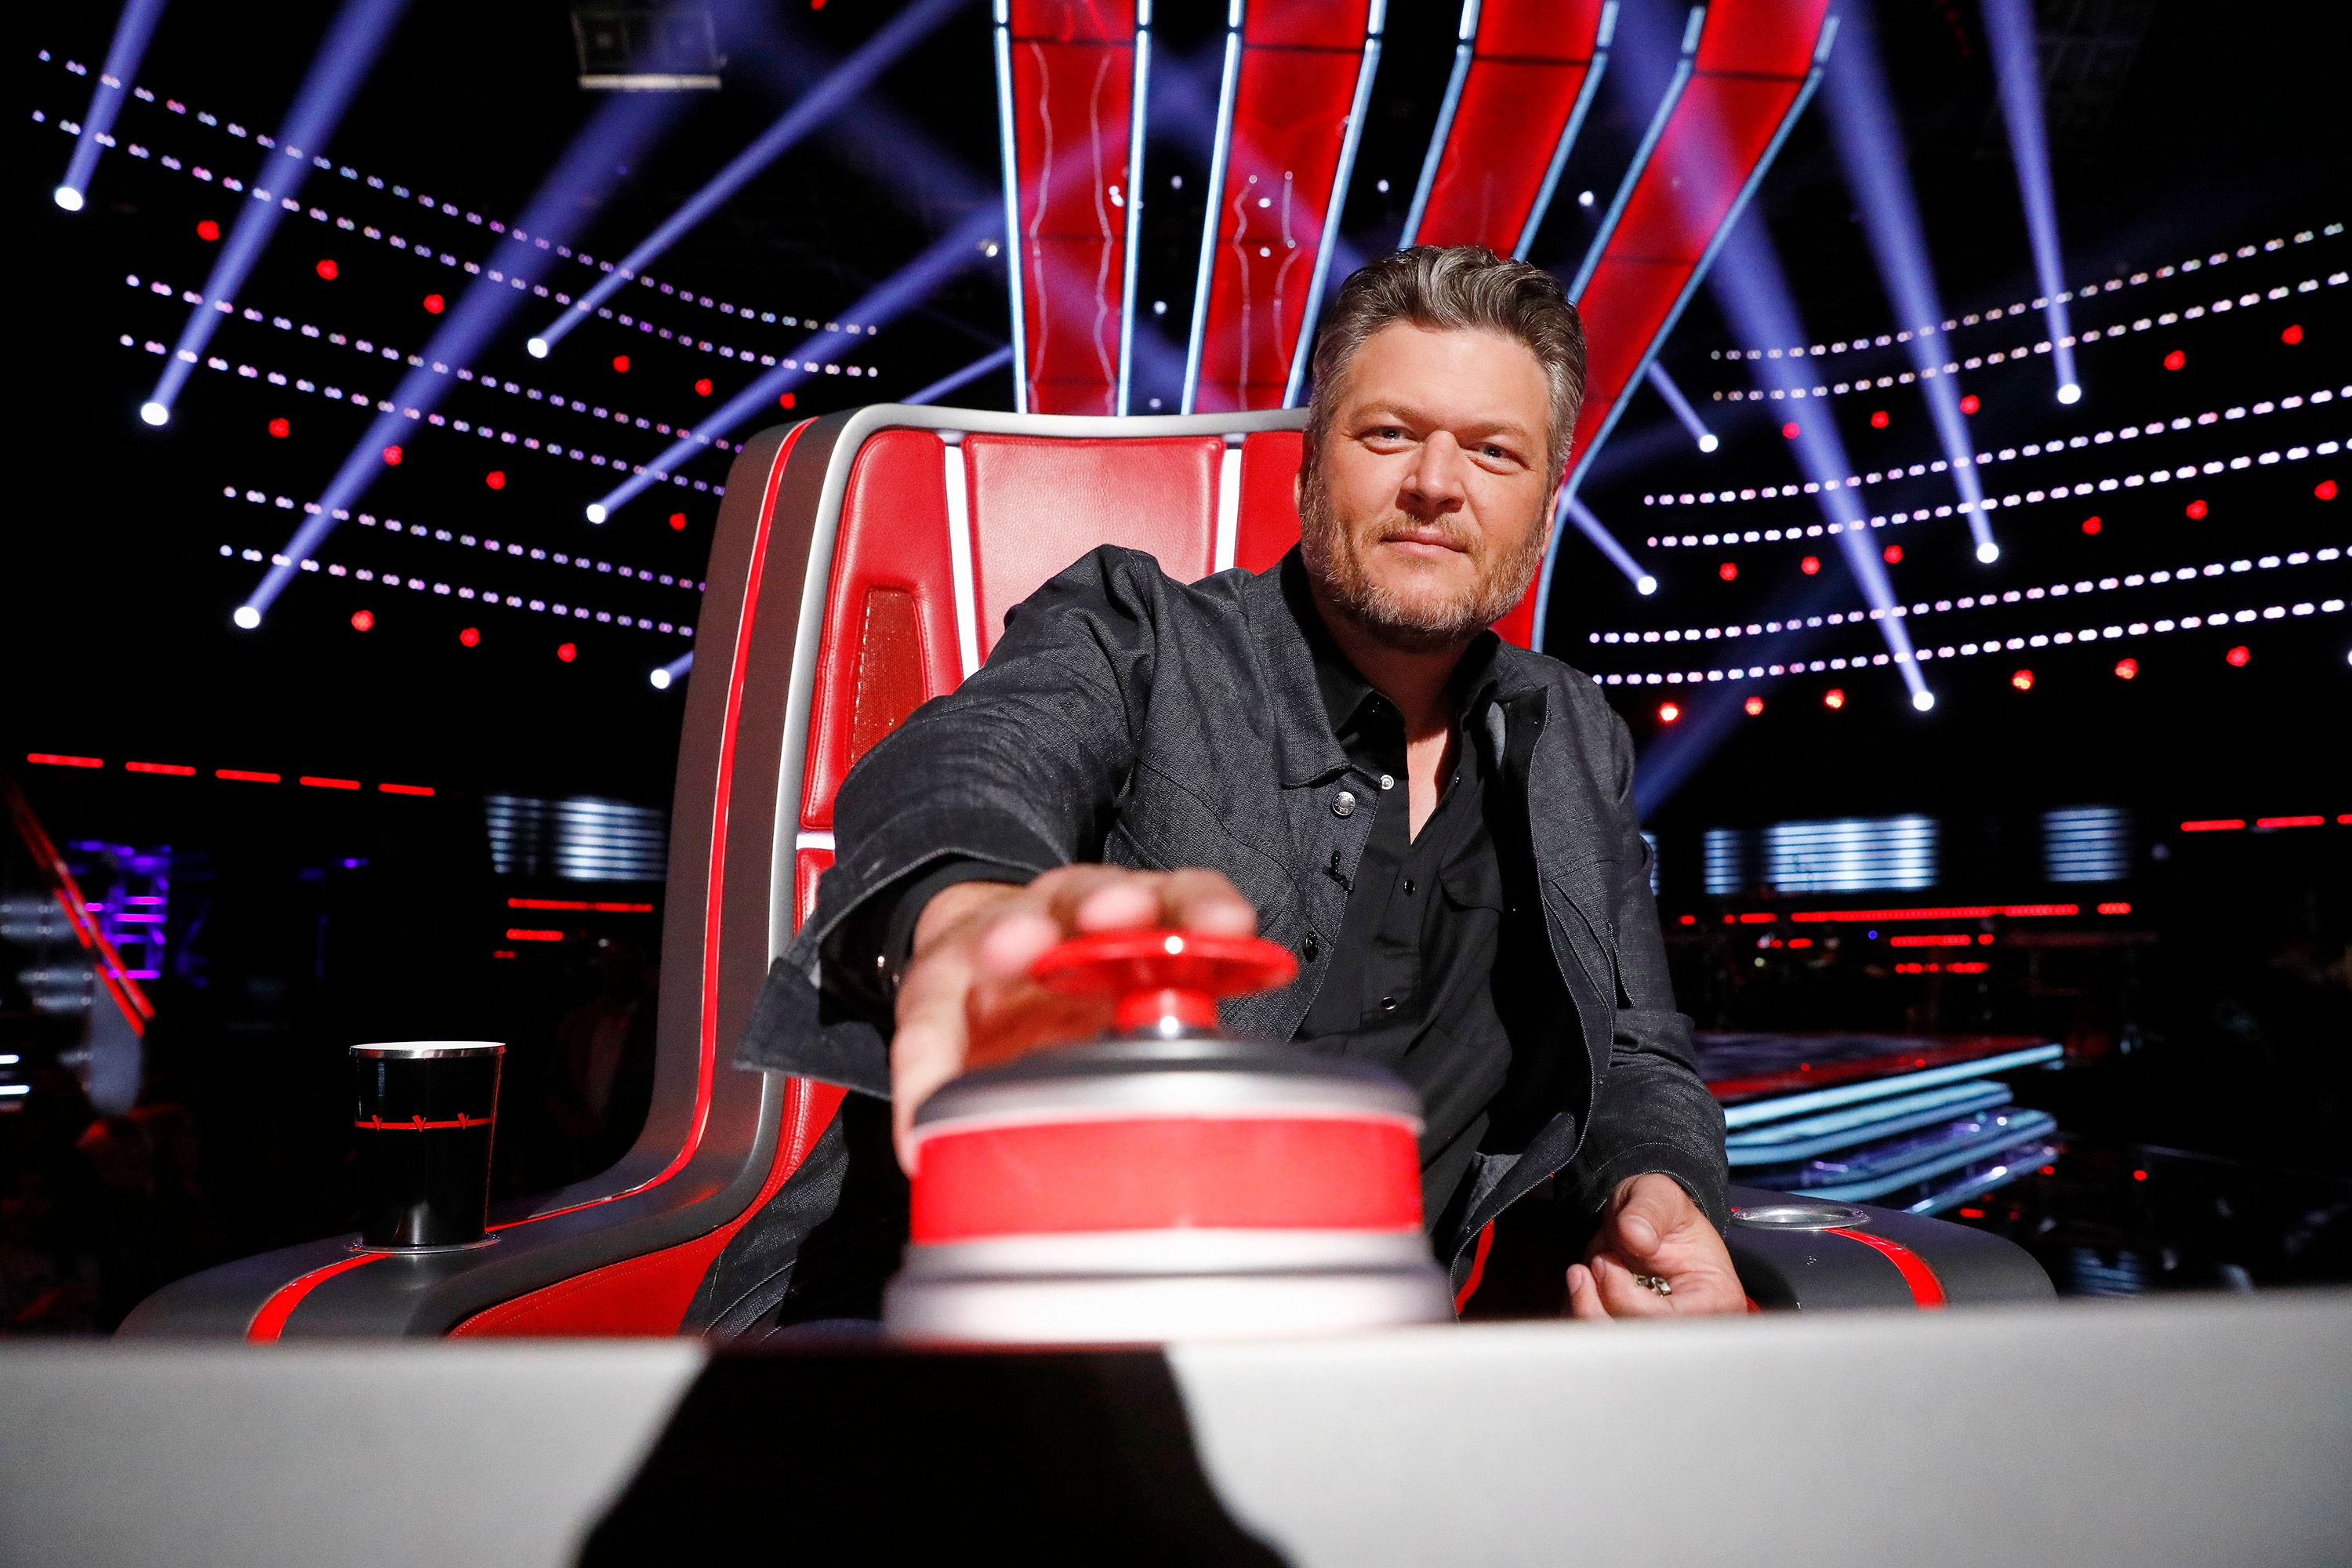 Blake Shelton at "The Voice" season 18 "Blind Auditions" on October 17, 2019 | Photo: Trae Patton/NBC/NBCU Photo Bank/Getty Images